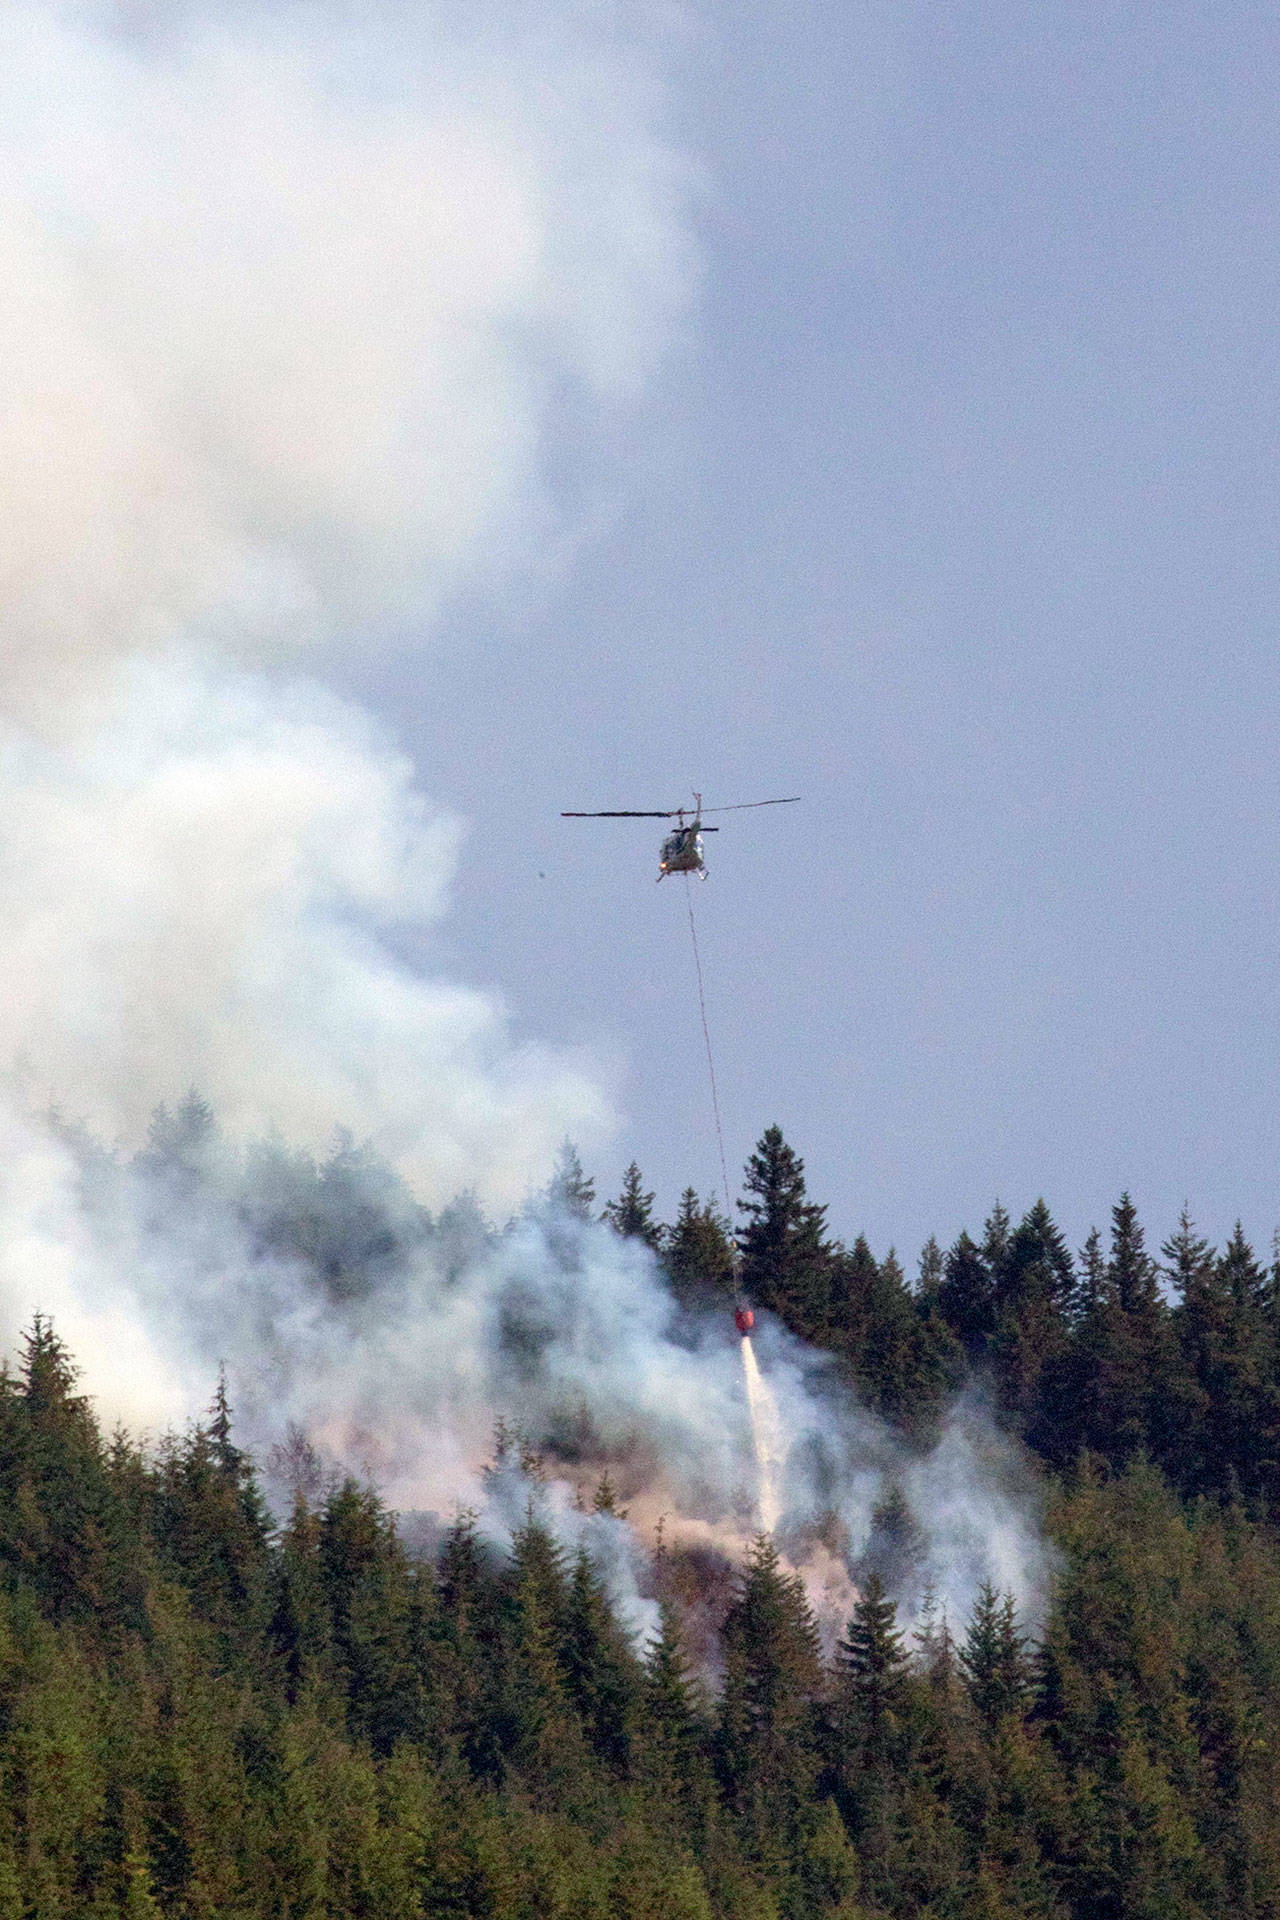 At least one helicopter assisted with water drops on the Blyn fire on Friday. (Robert Steelquist)